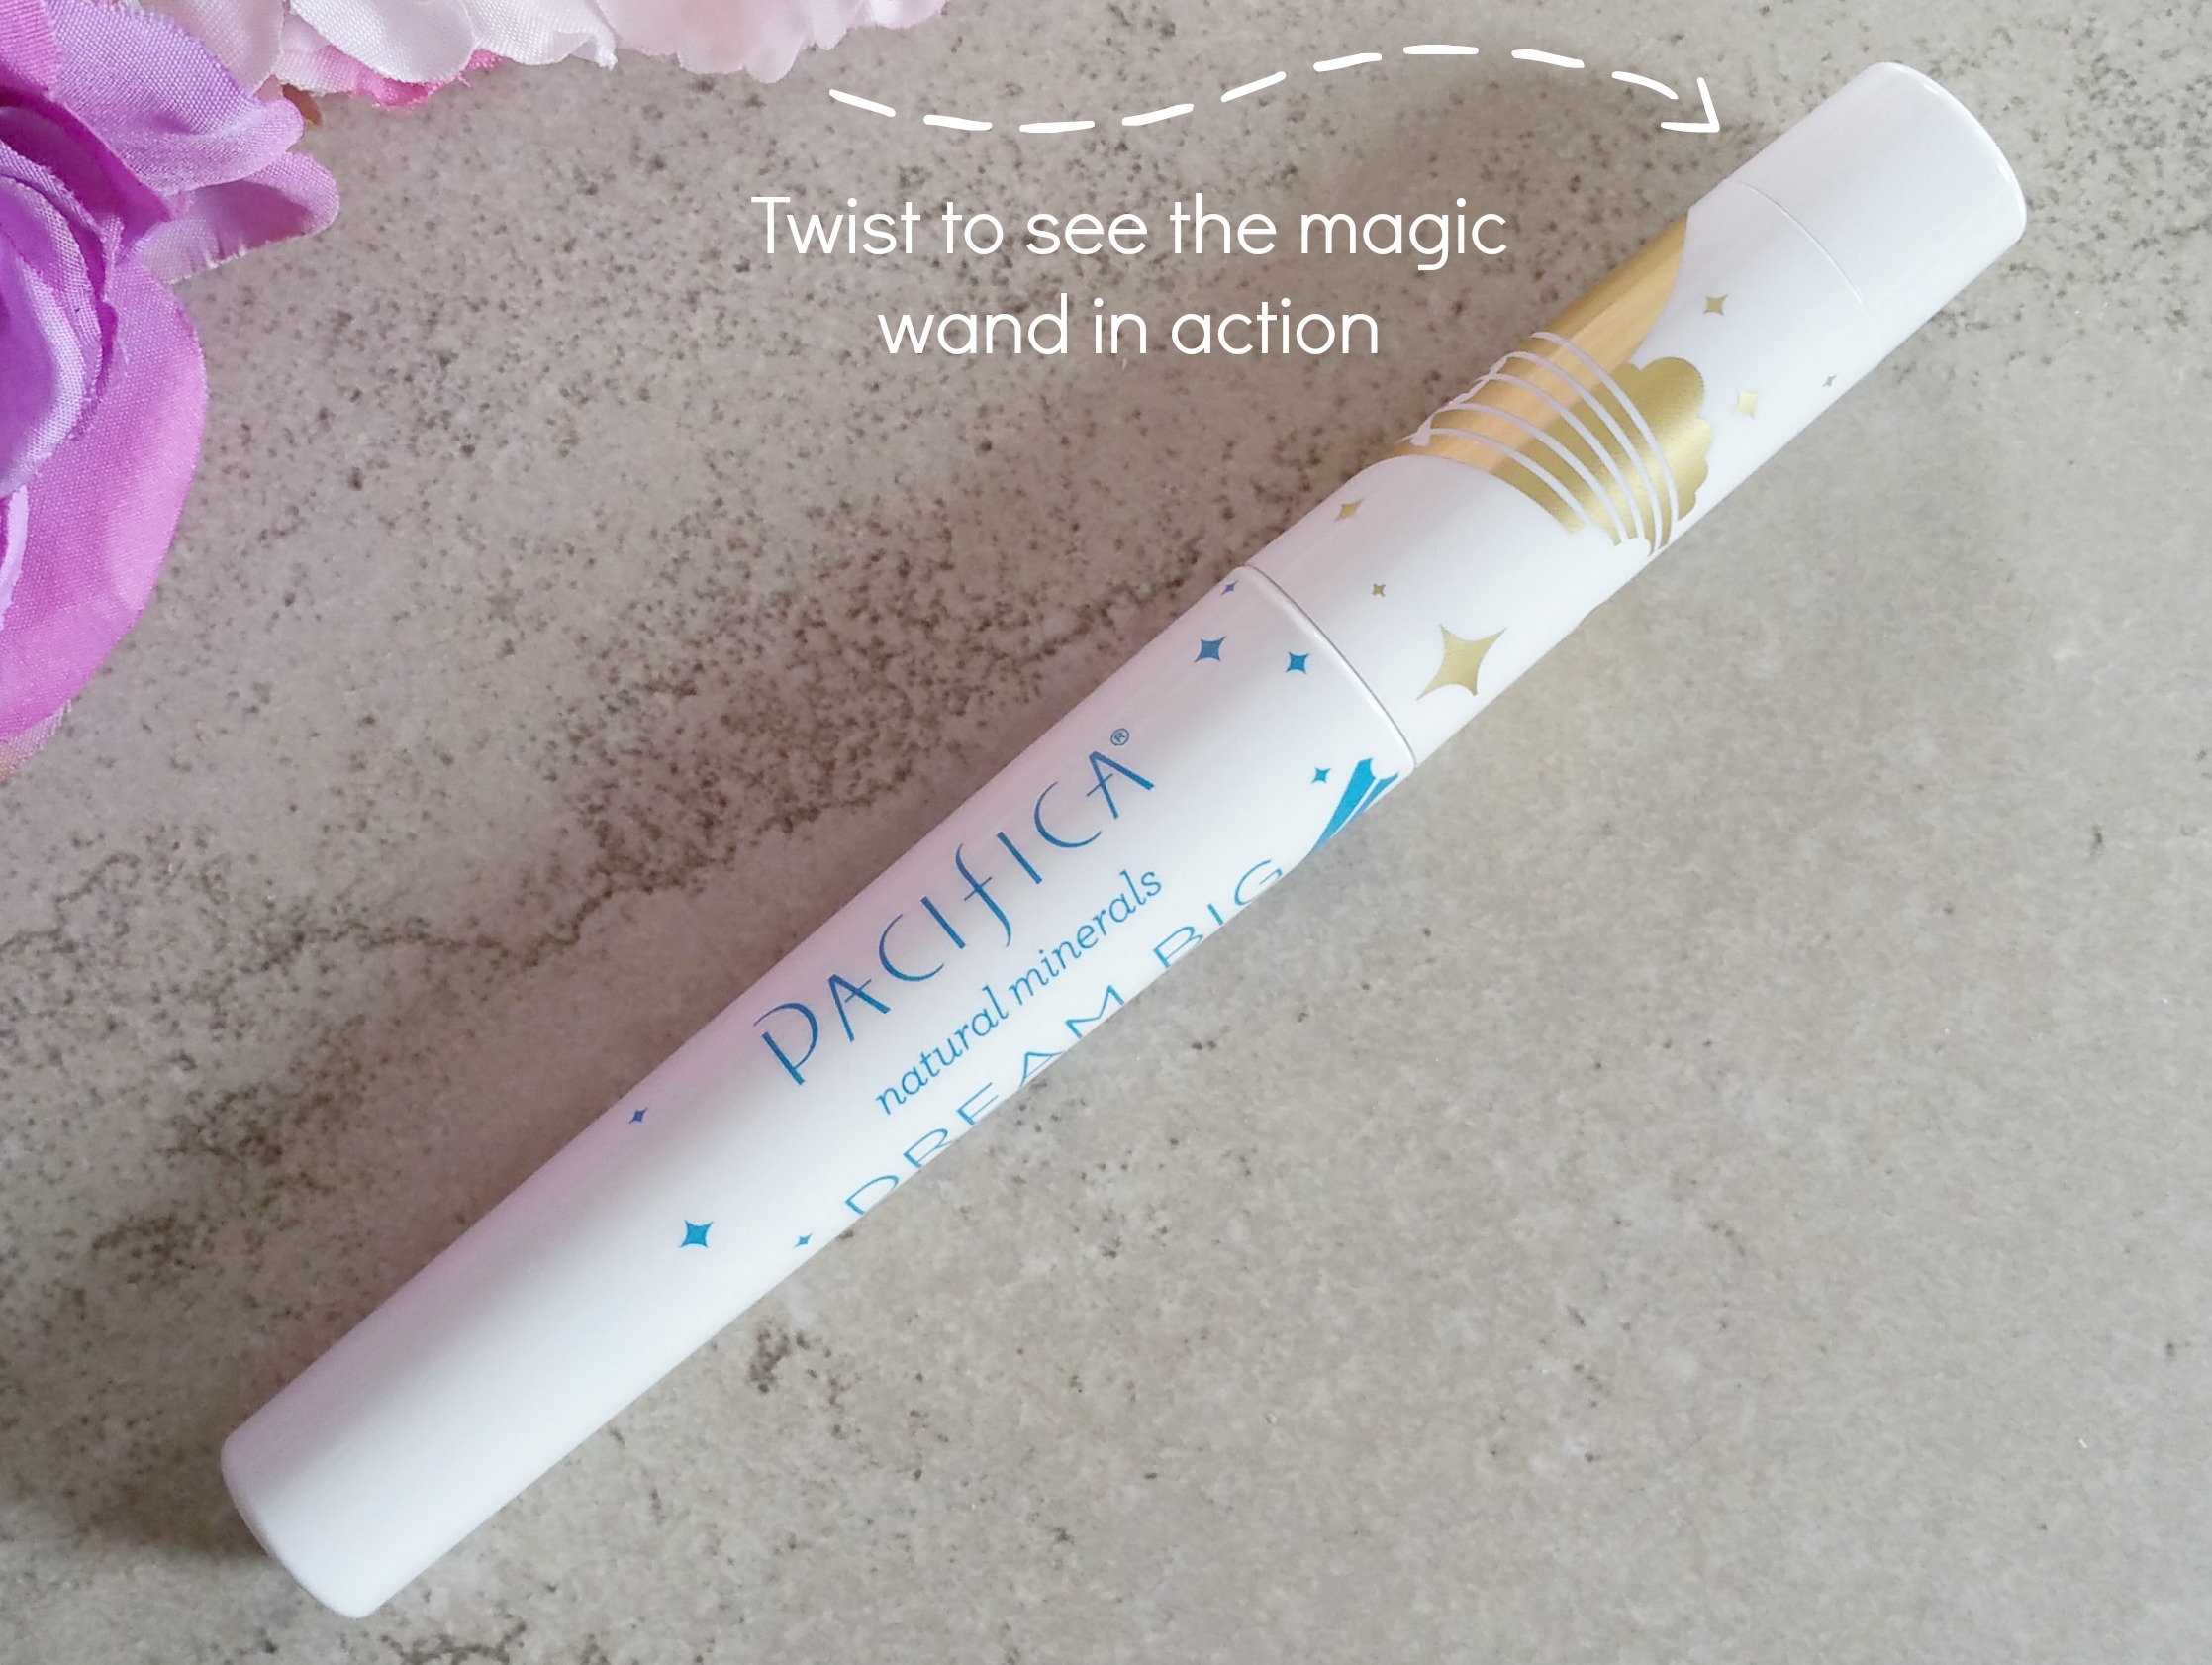 Length and Volume in a Twist - Pacifica DreamBig Lash Extending 7-in-1 Mascara, Review & Demo